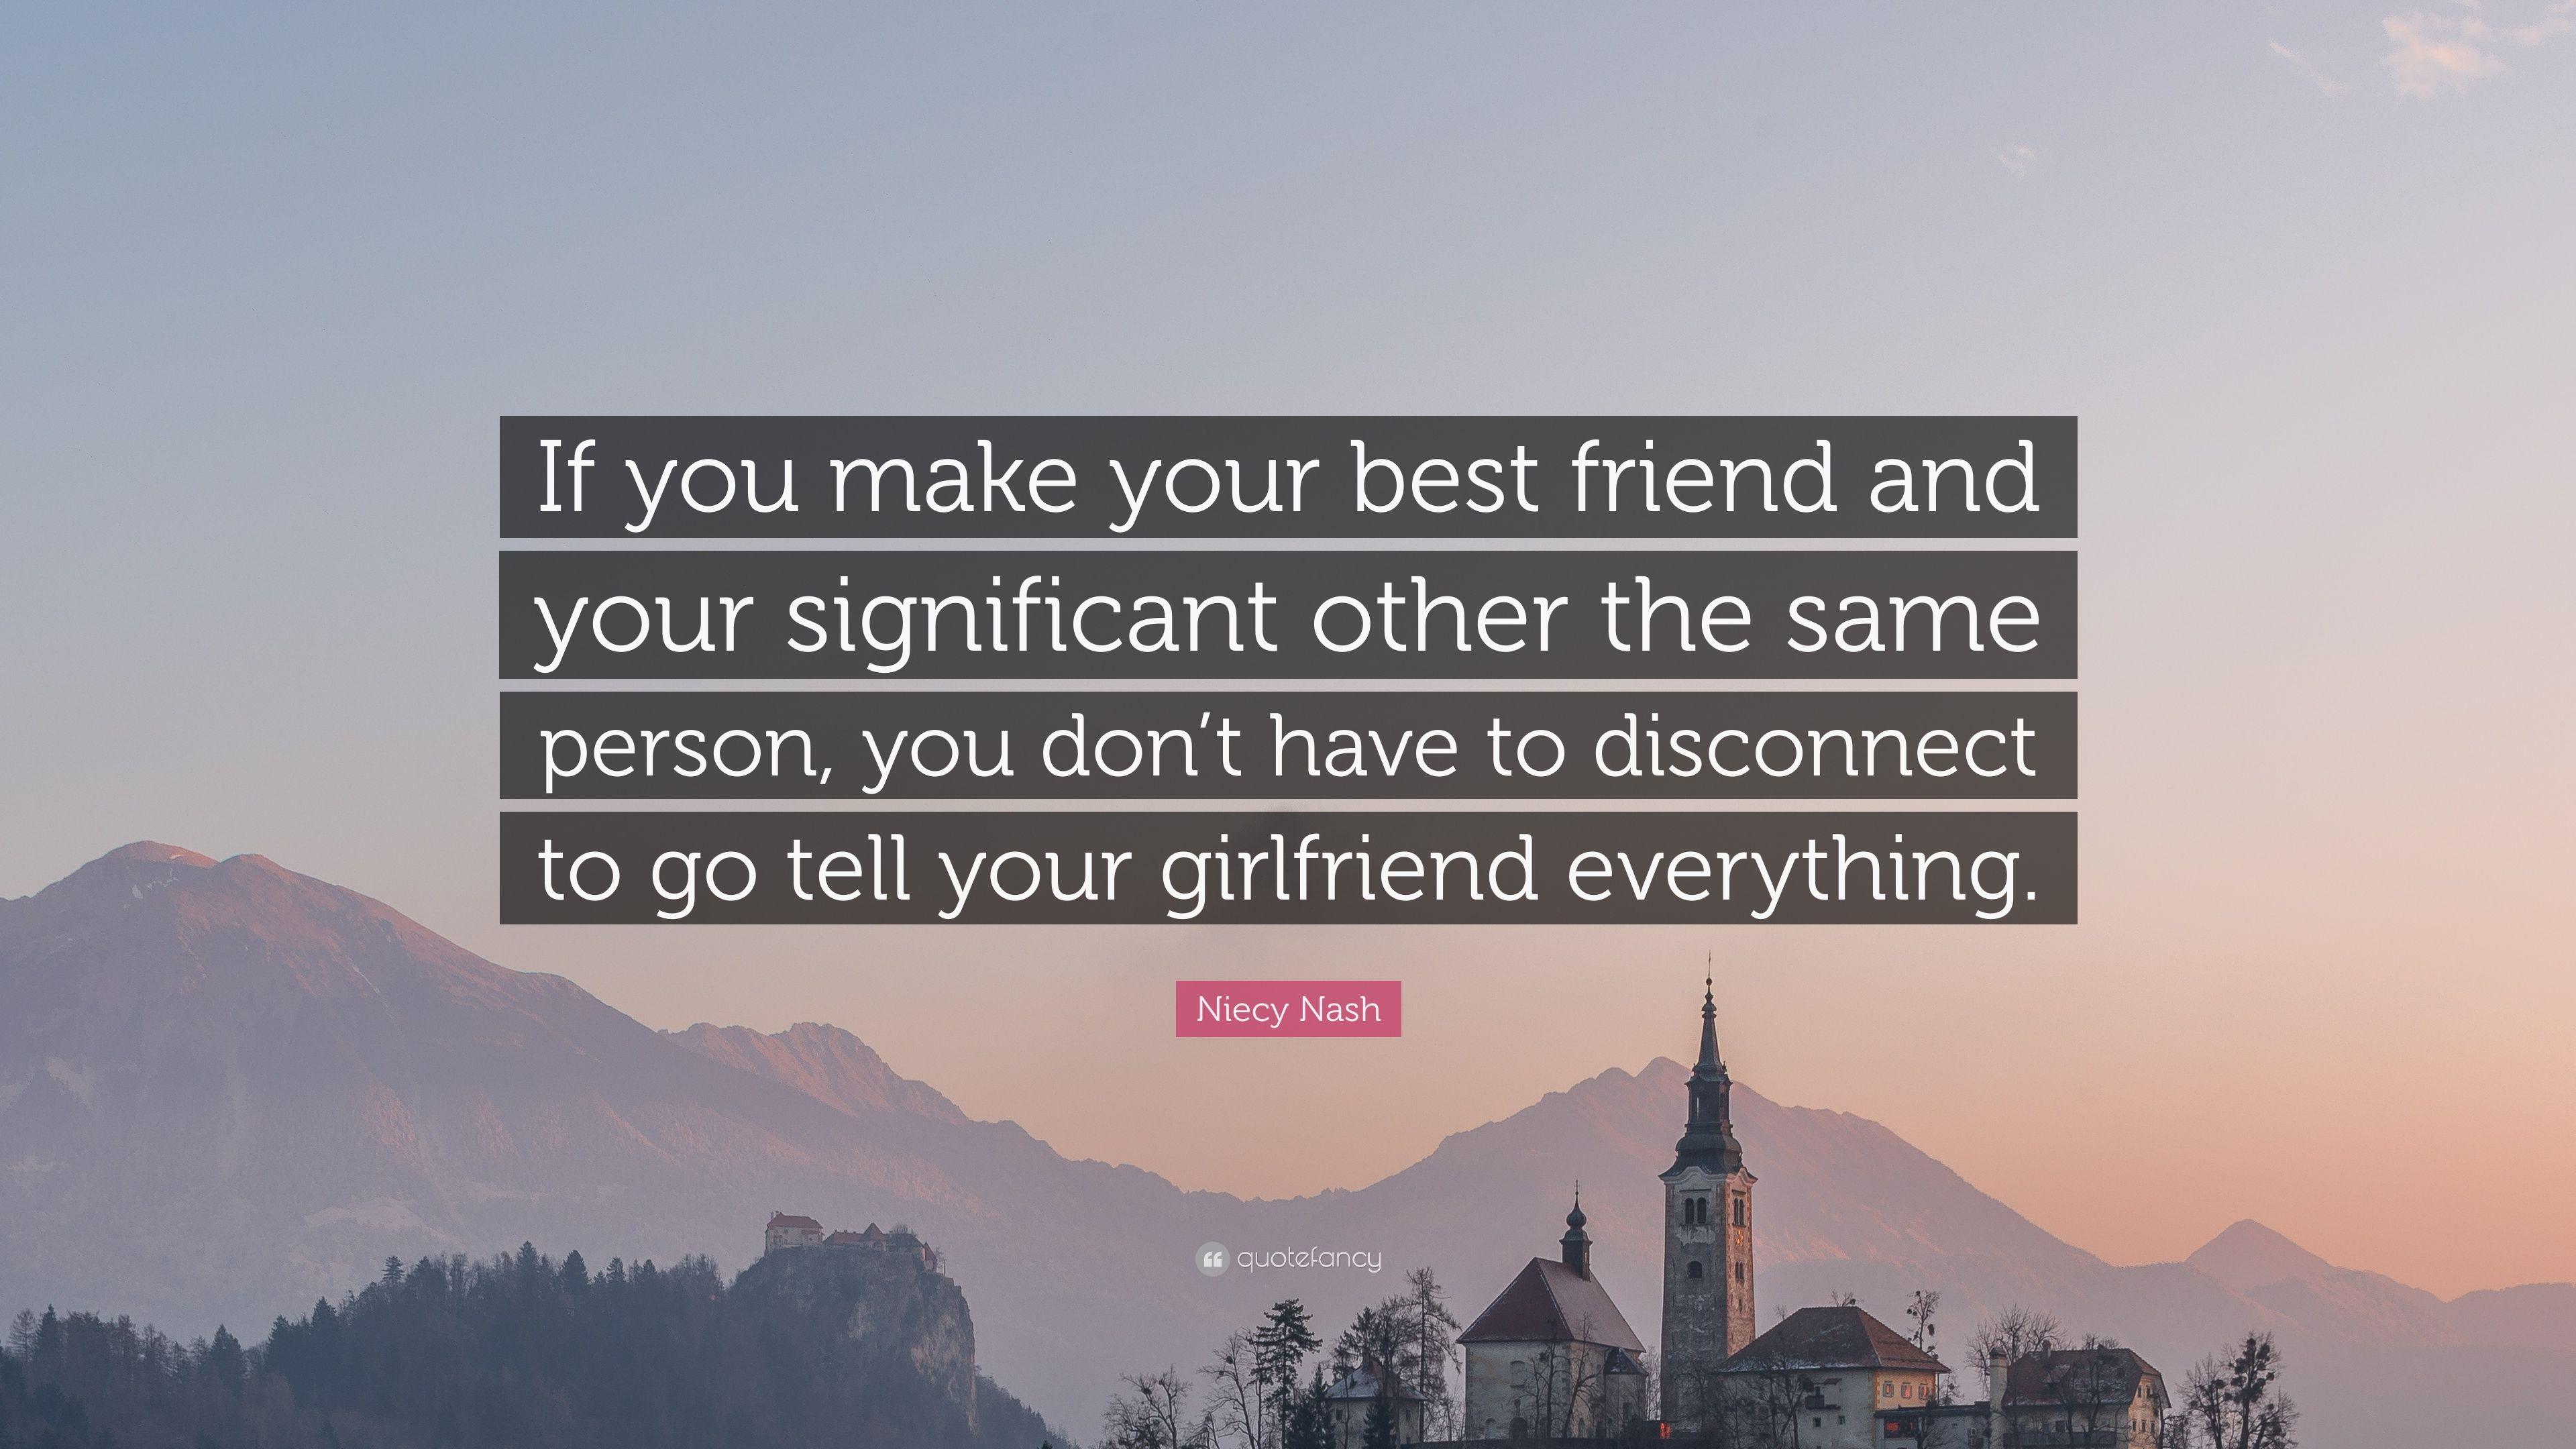 Niecy Nash Quote: “If you make your best friend and your significant